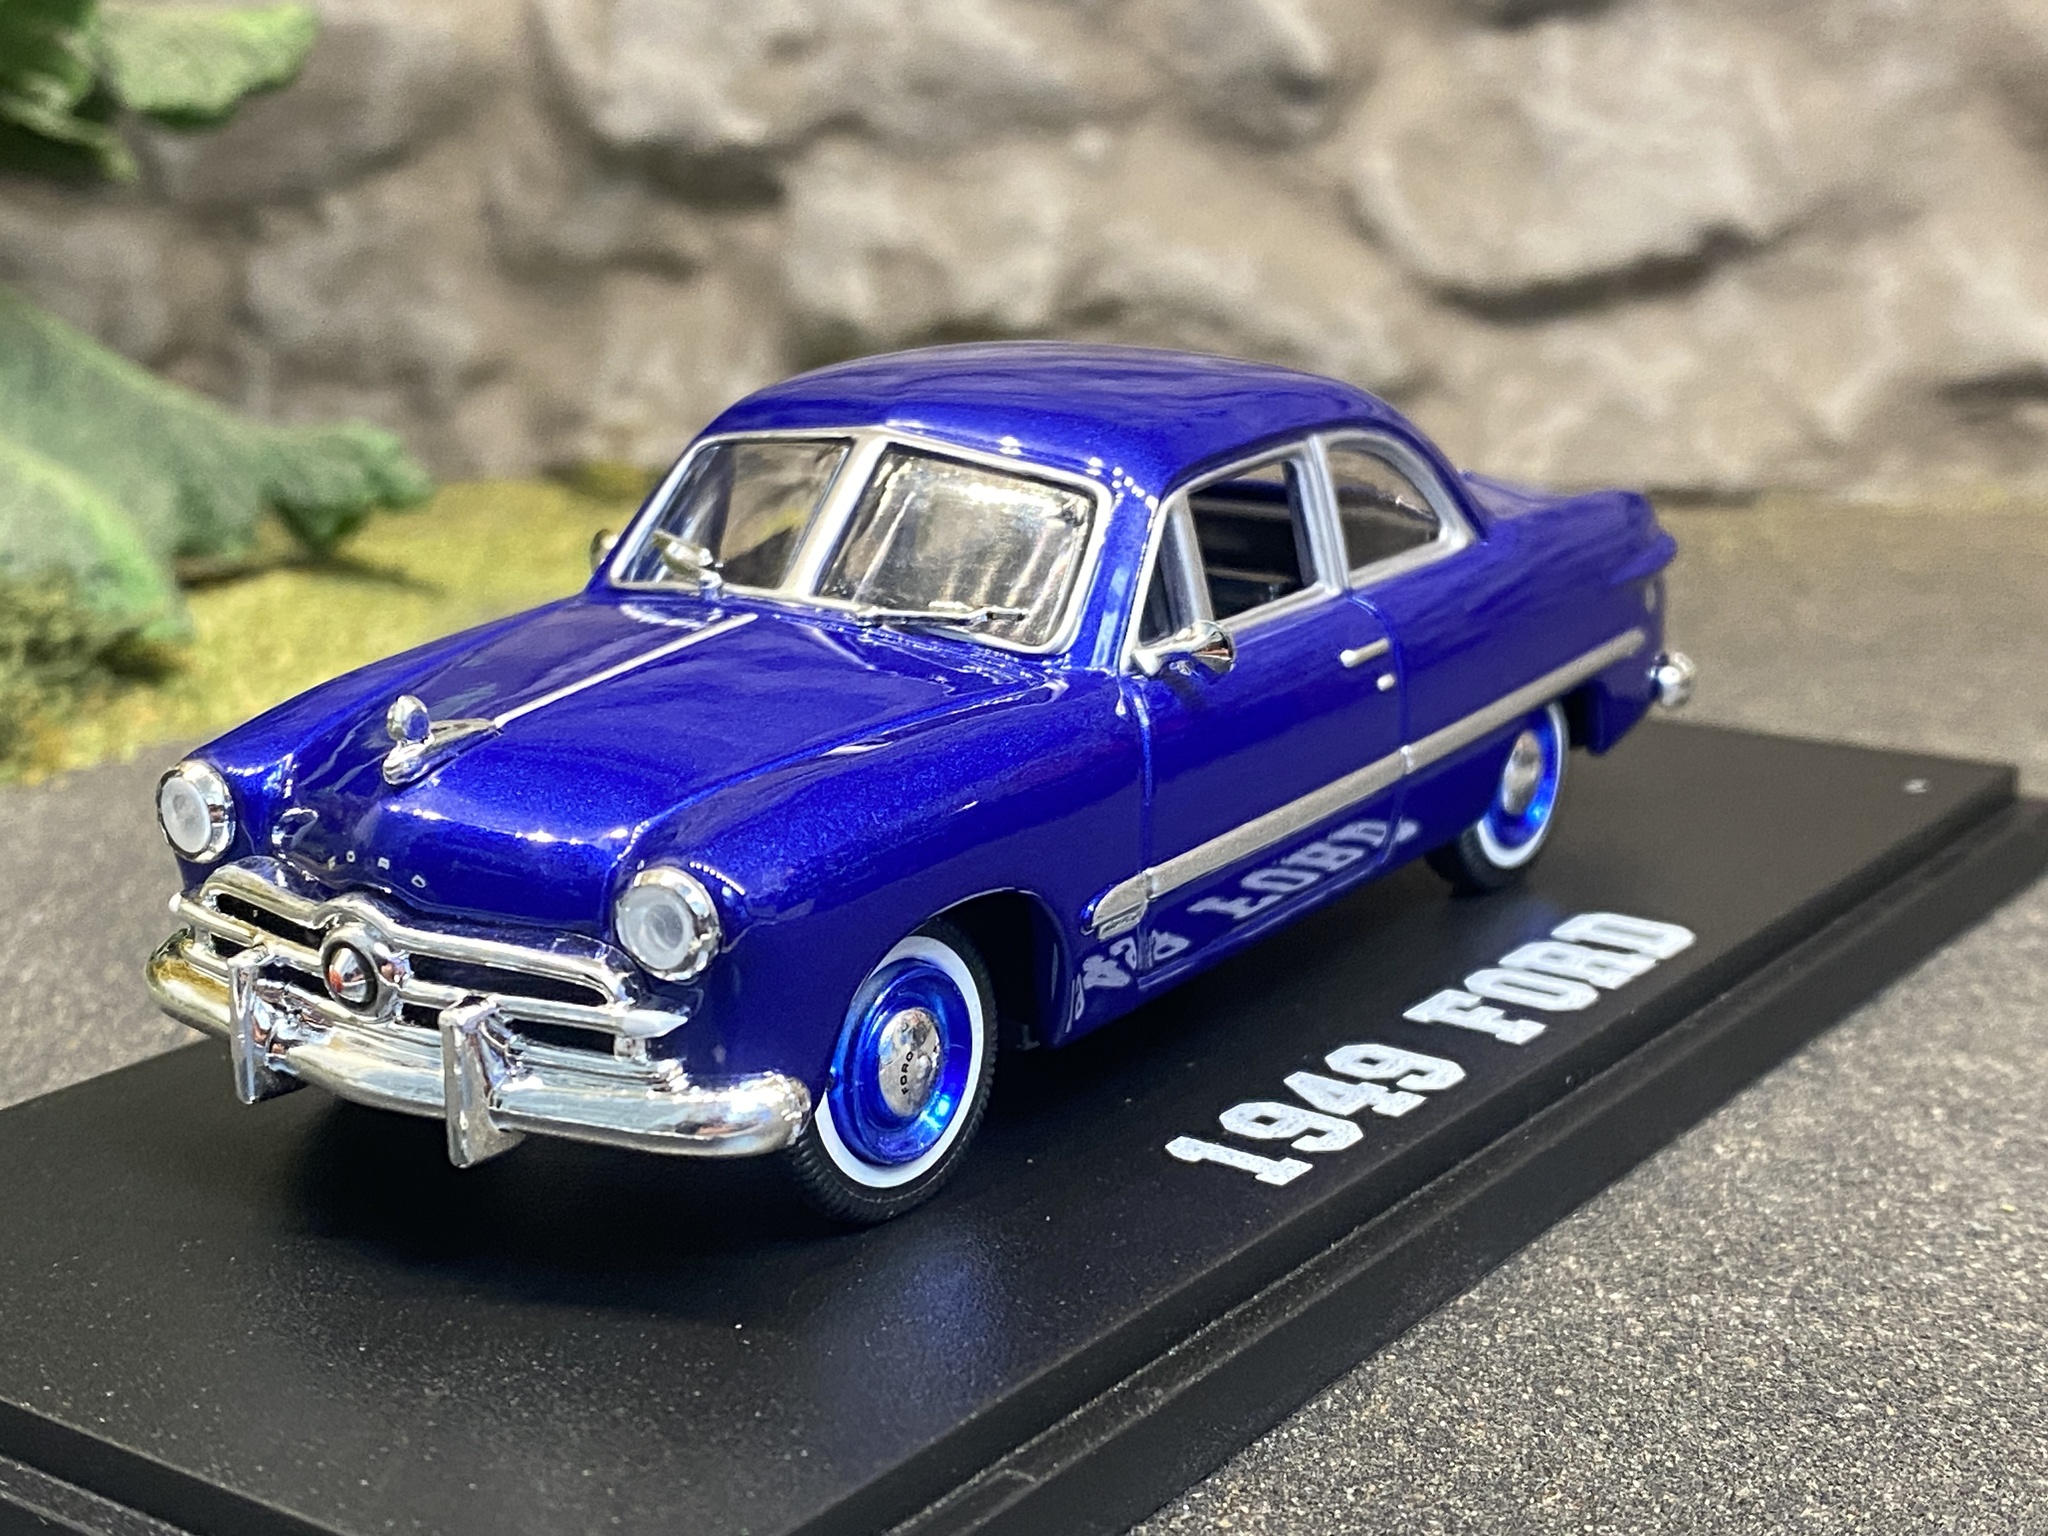 Skala 1/43 1949 Ford. The Cars that made America - History - Greenlight